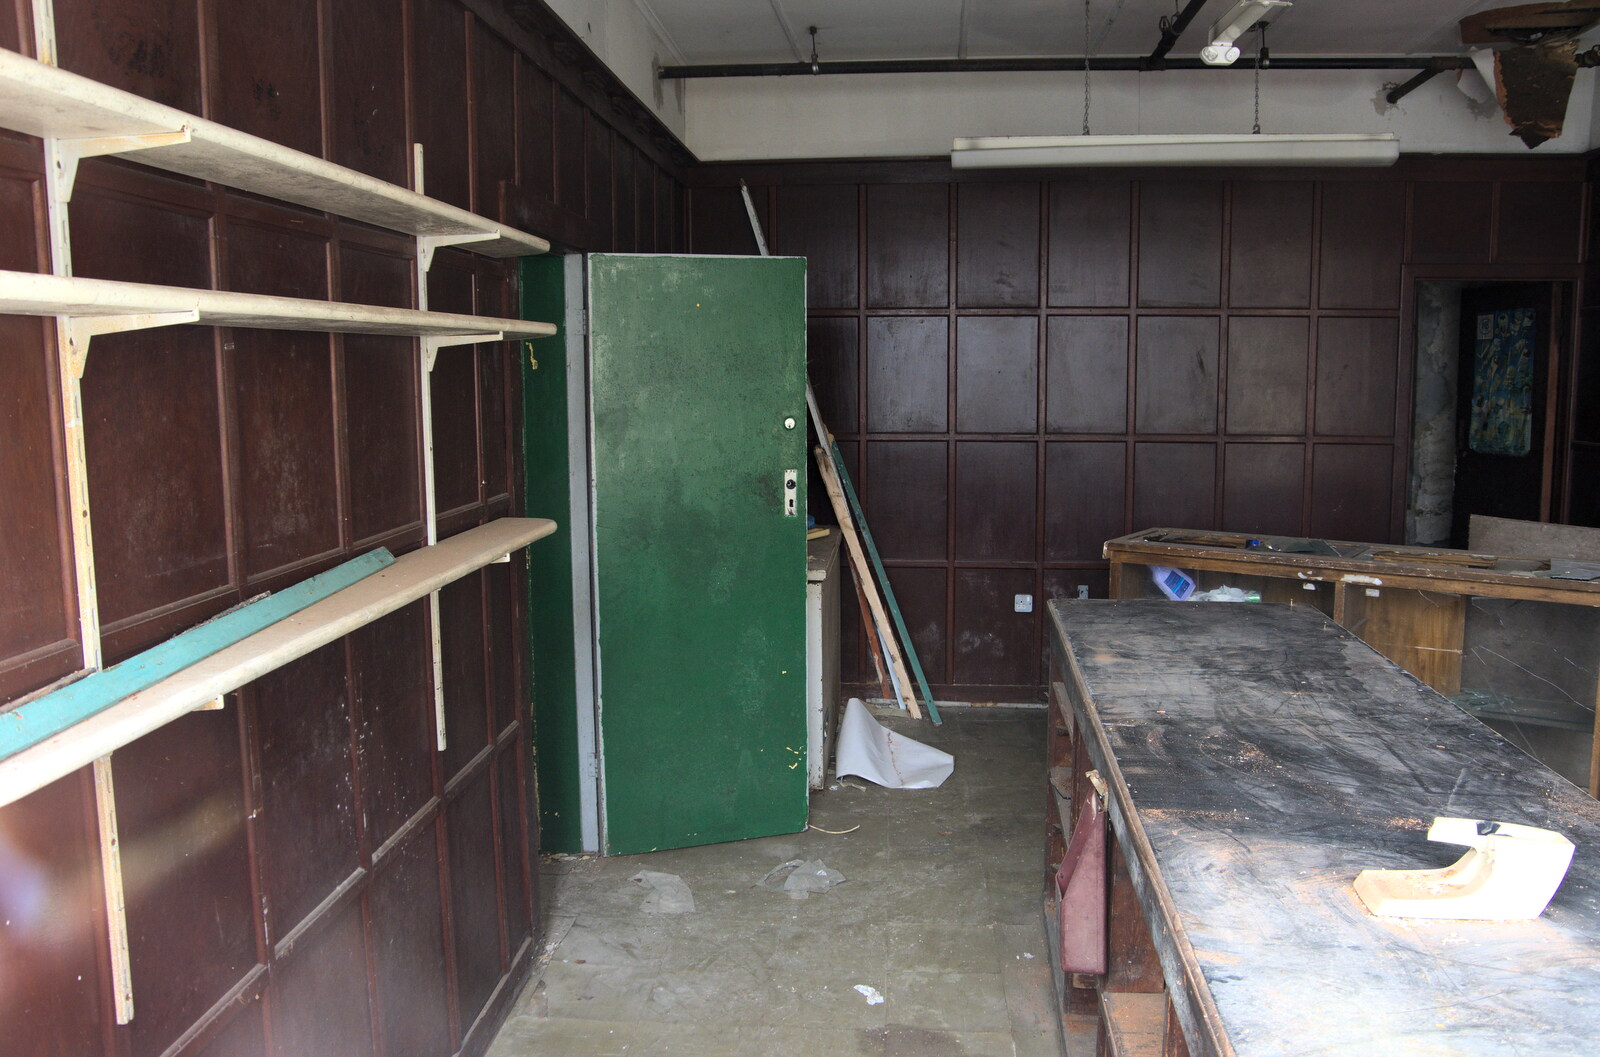 A derelict shop with wooden panneling from Manorhamilton and Bundoran, Leitrim and Donegal, Ireland - 16th April 2022